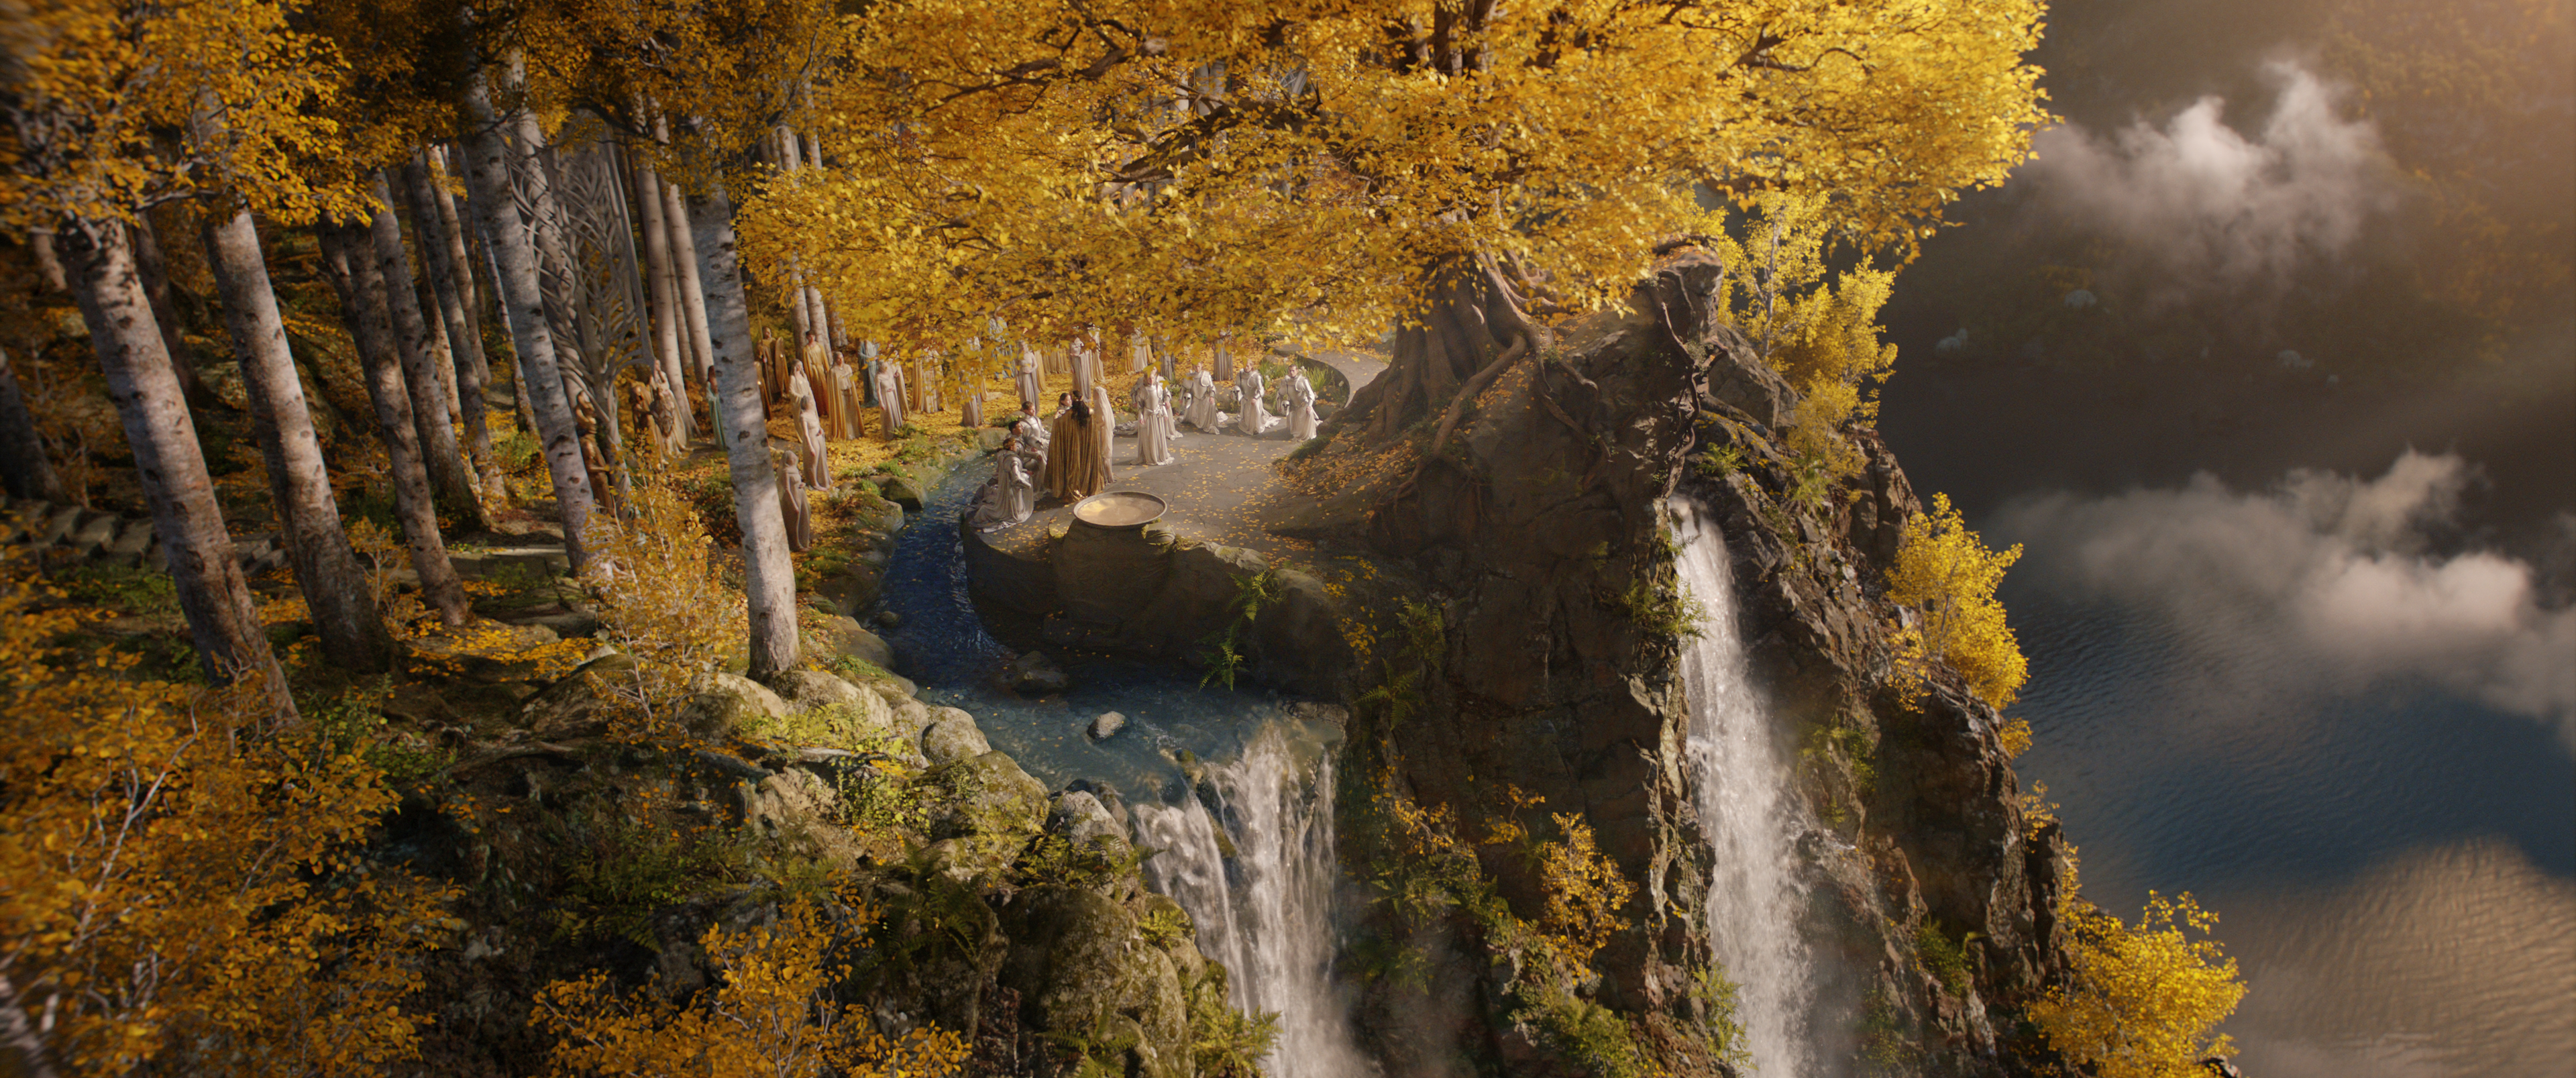 Lord of the Rings The Rings of Power release date, cast, trailer